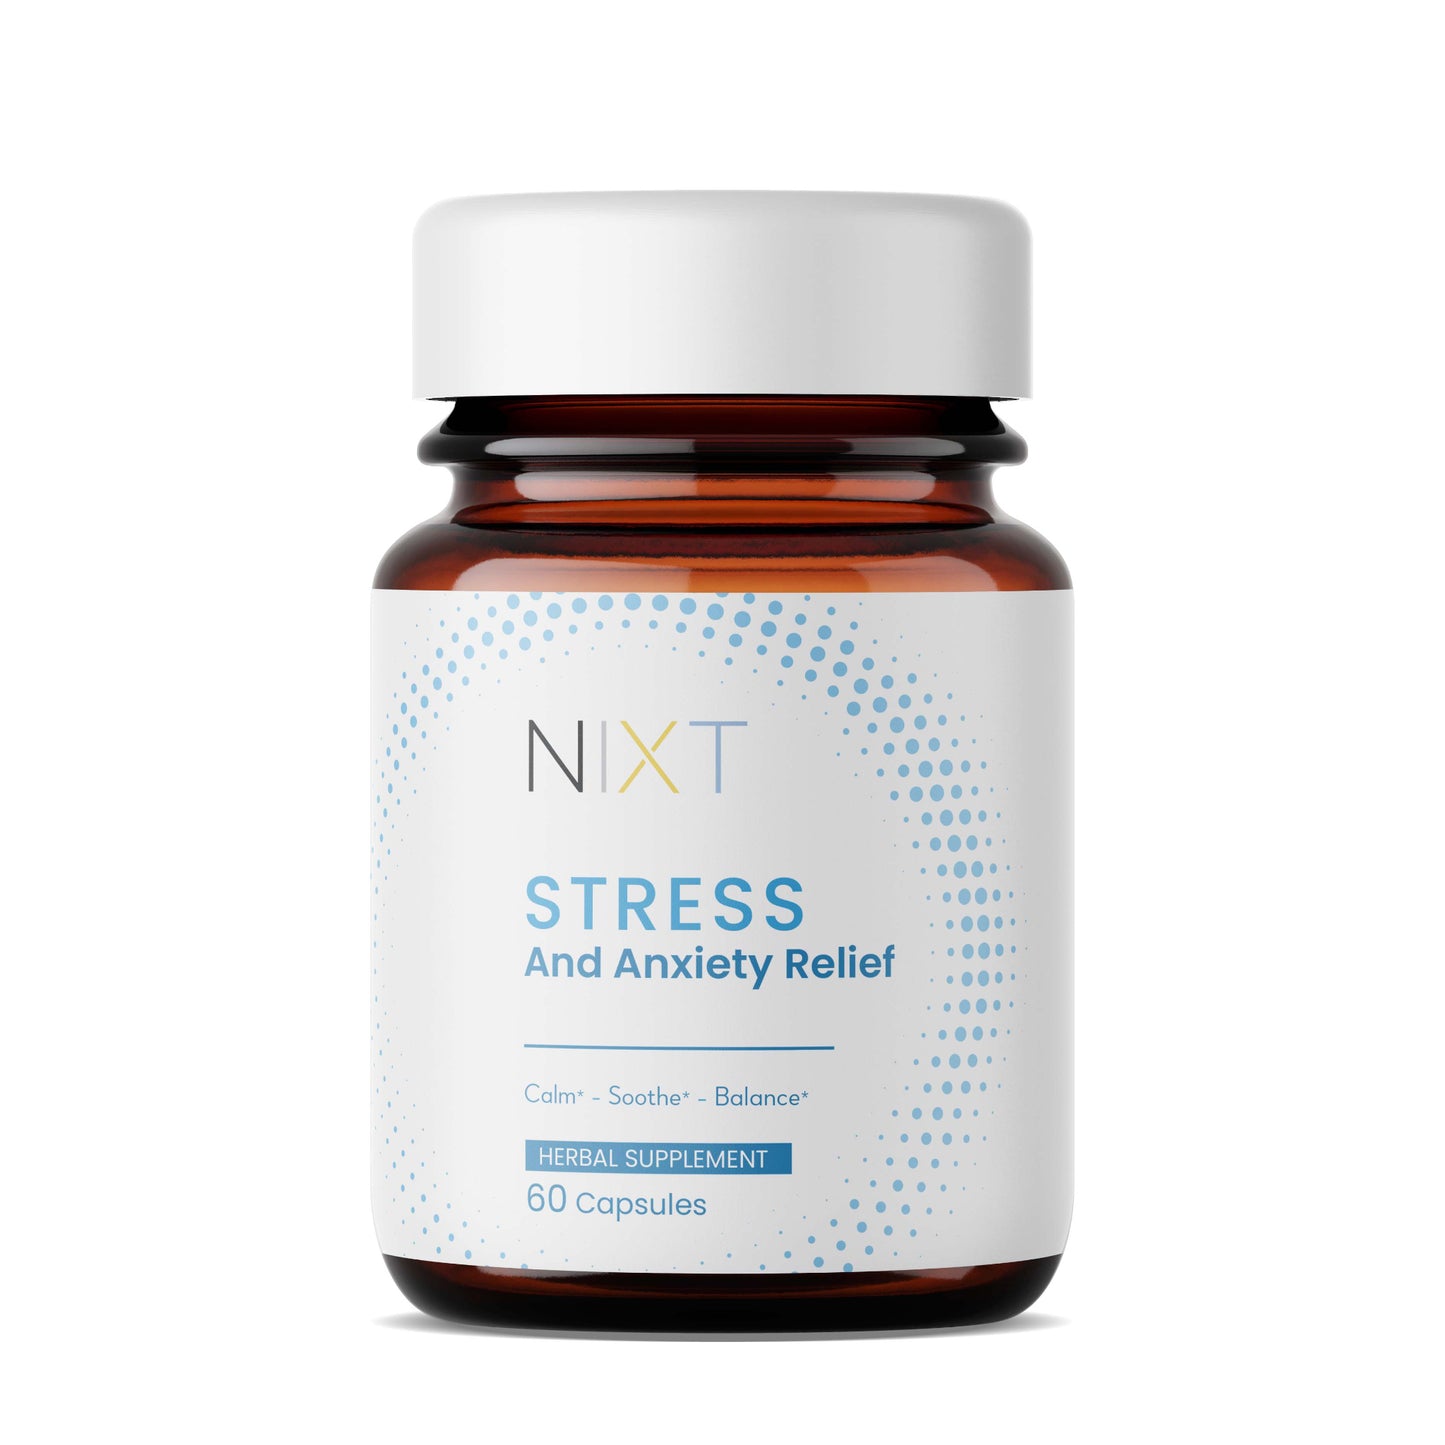 Stress & Anxiety Relief